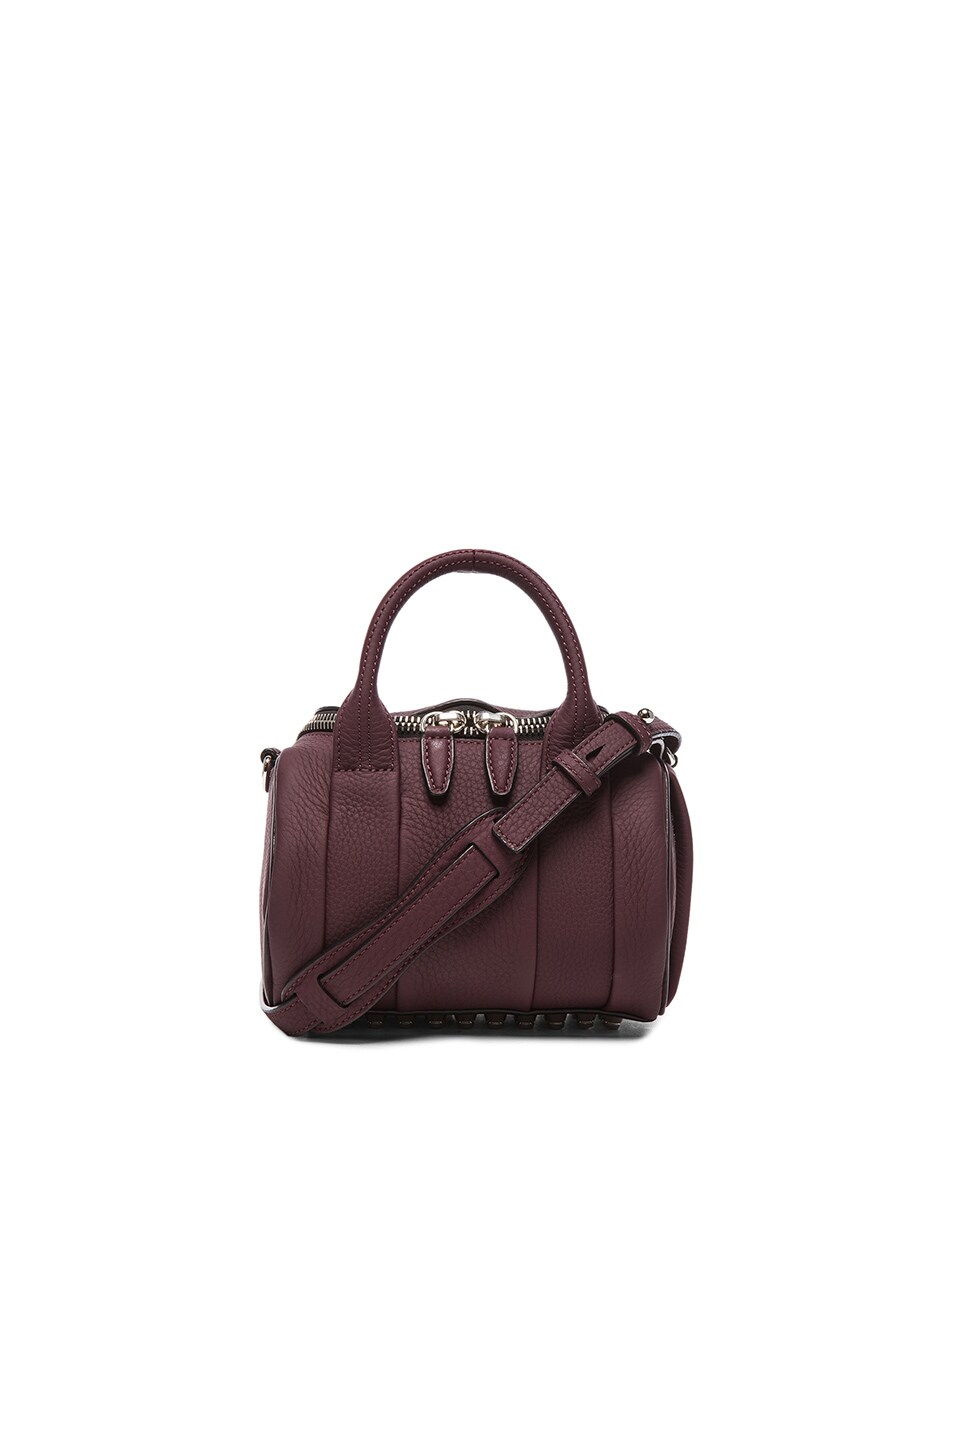 Image 1 of Alexander Wang Mini Rockie Satchel with Silver Hardware in Oxblood